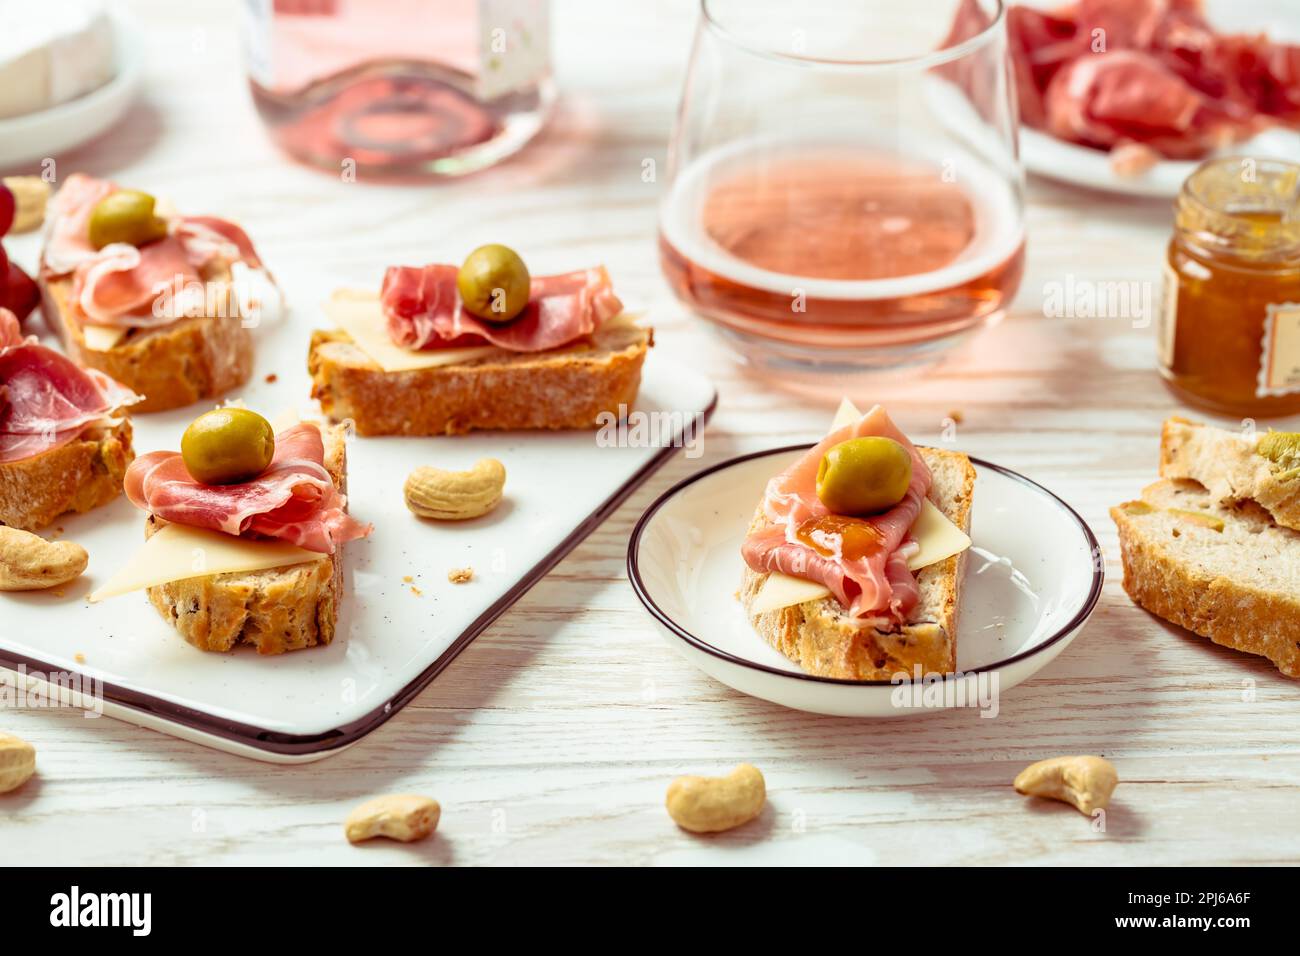 Appetizers and open sandwiches with Italian antipasti, camembert, Parma ham and rose wine on wooden table Stock Photo